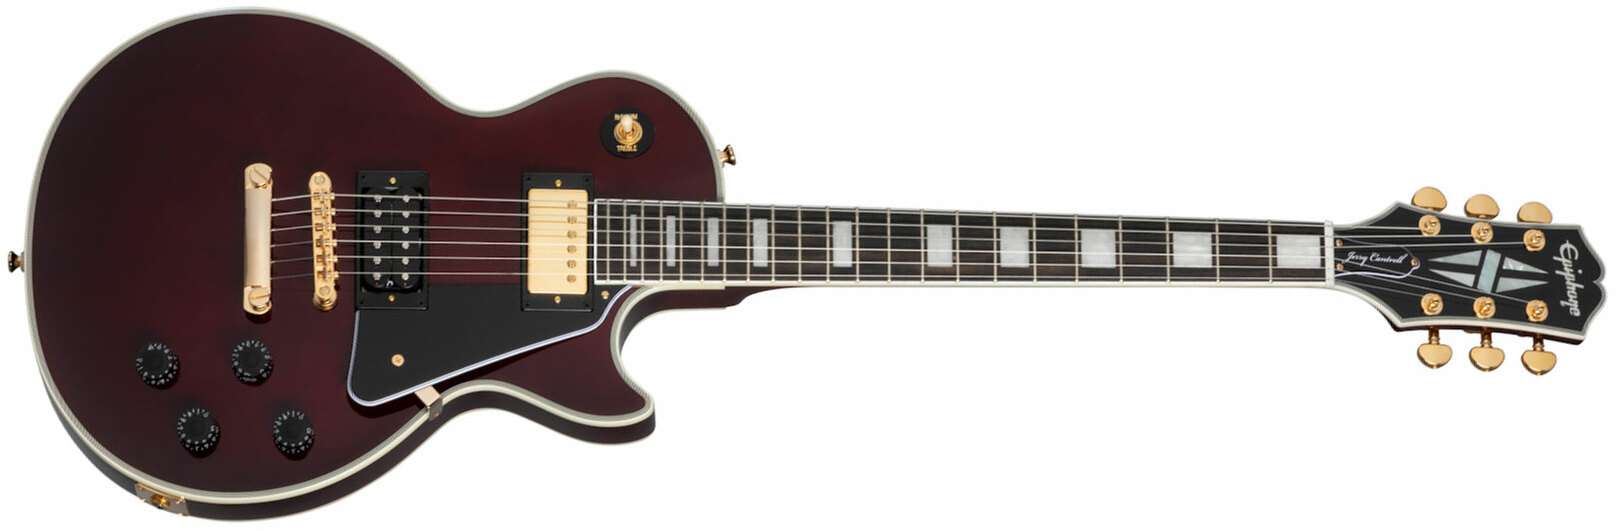 Epiphone Jerry Cantrell Les Paul Custom Wino Signature 2h Ht Eb - Wine Red - Single cut electric guitar - Main picture